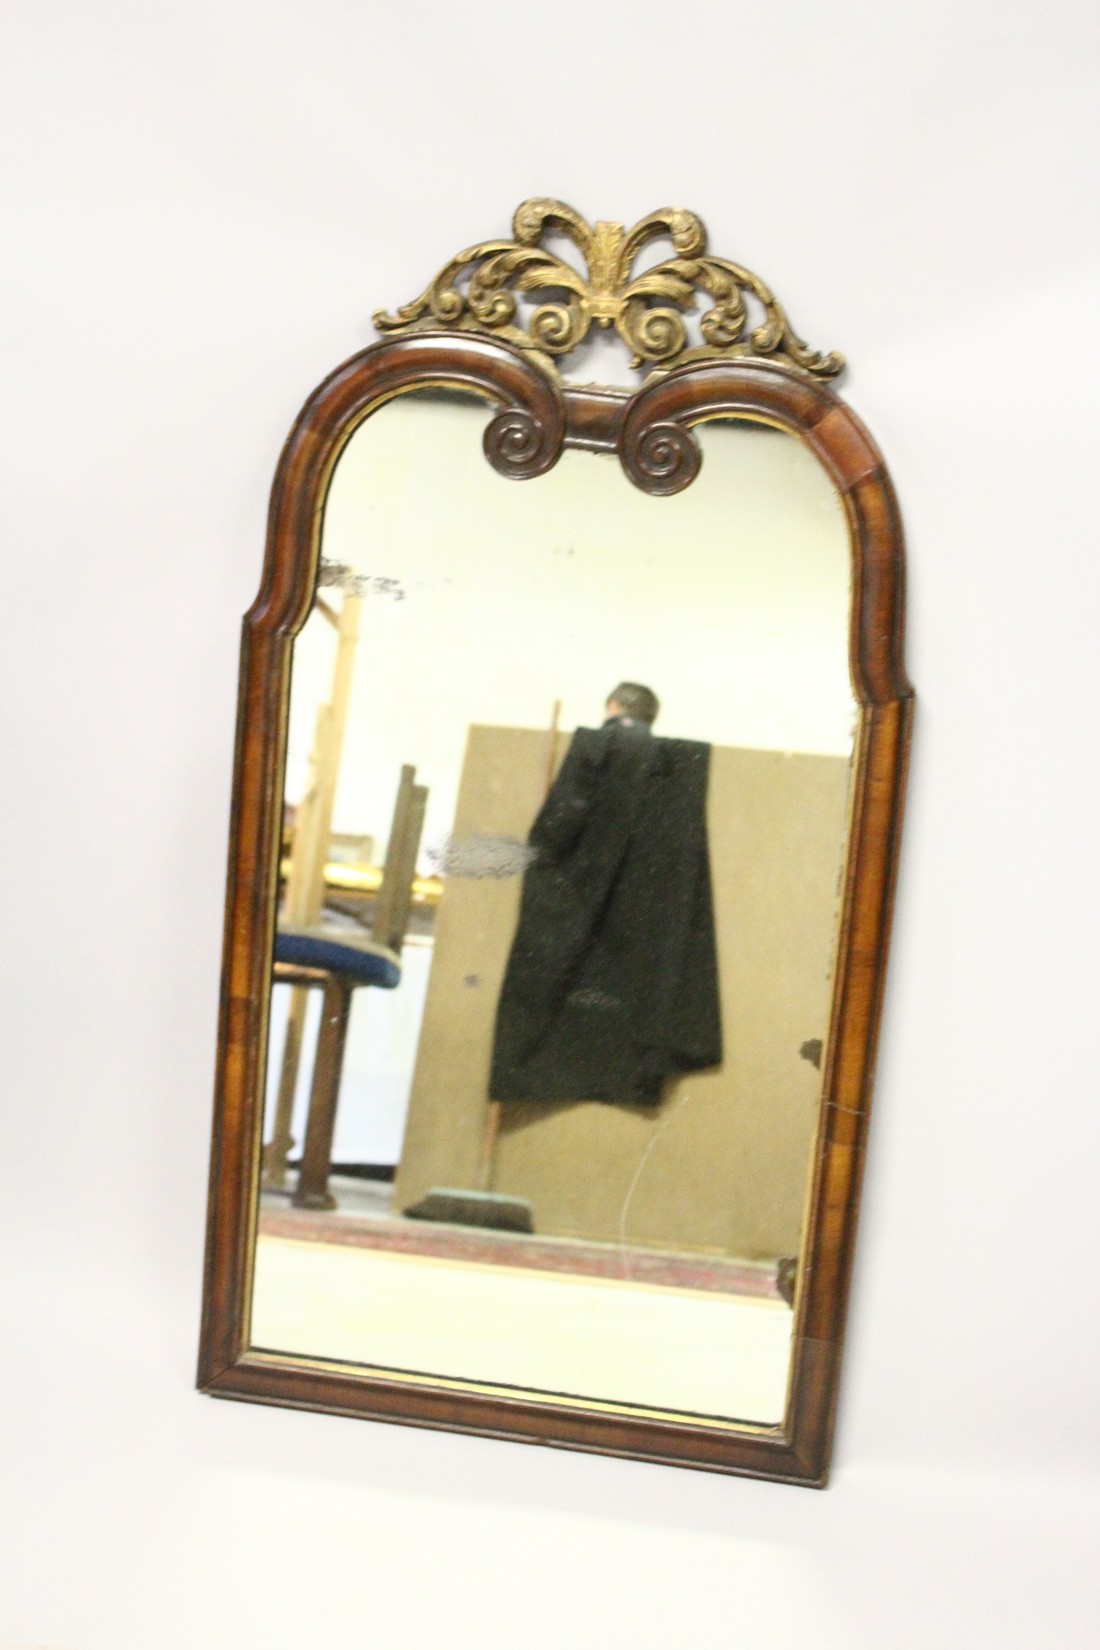 AN EARLY 18TH CENTURY WALNUT AND CARVED GILT UPRIGHT MIRROR 3ft 1ins high, 1ft 8ins wide. - Image 3 of 4